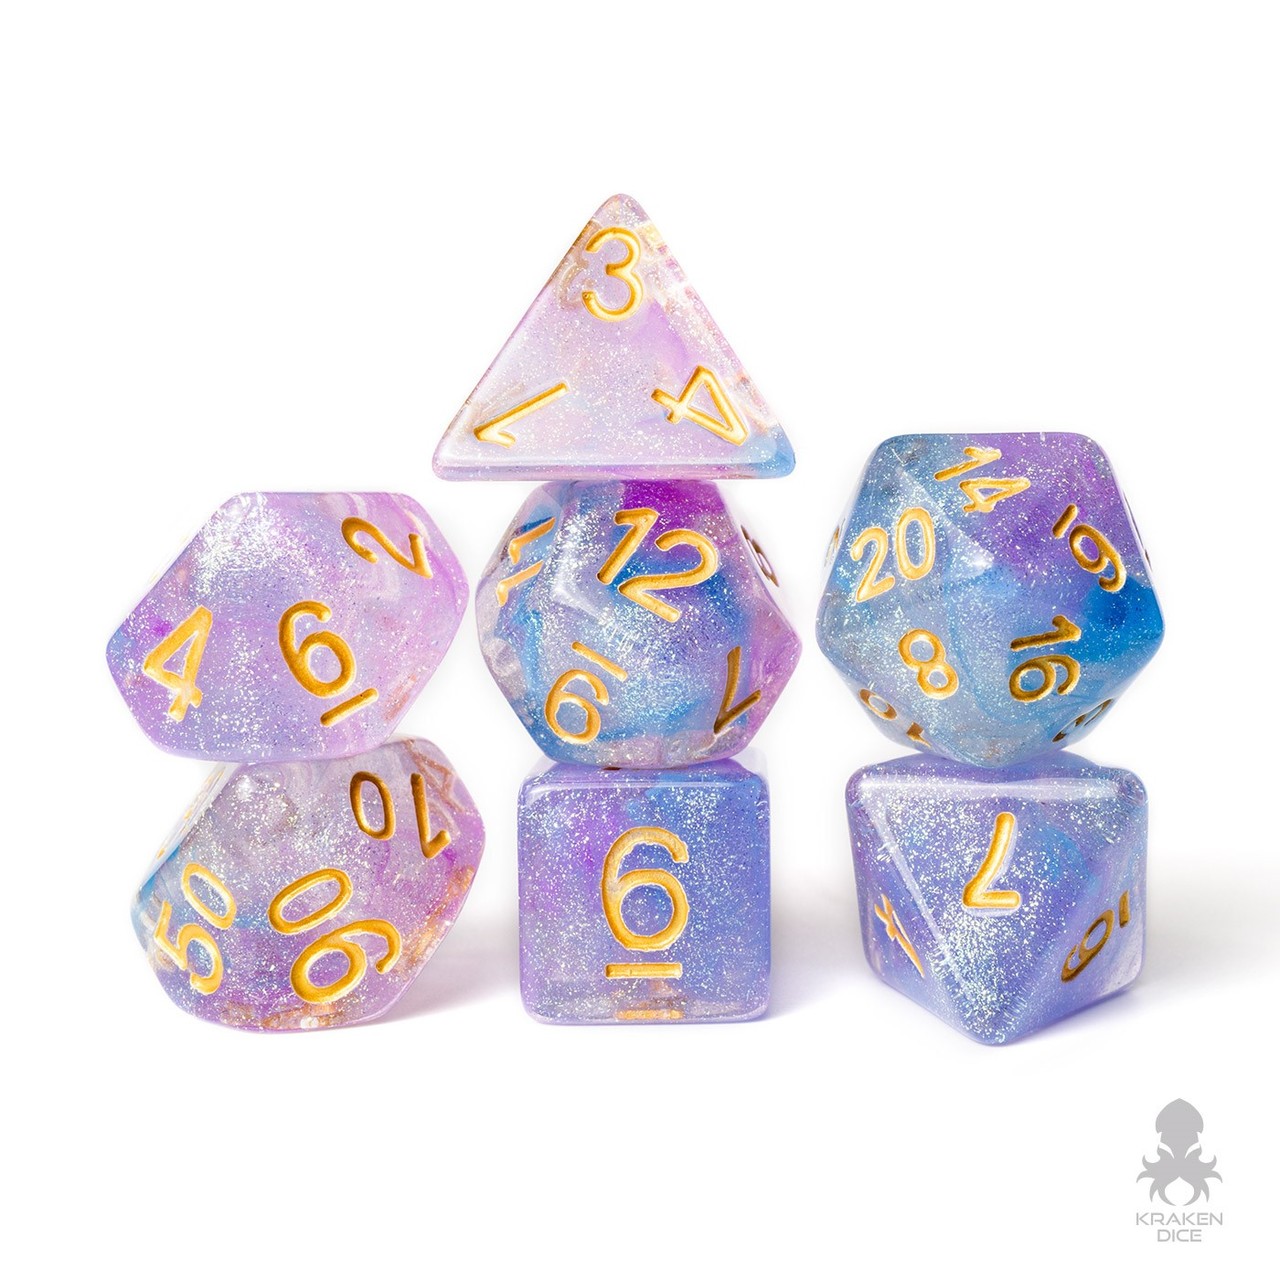 DND dice that are pink, purple and blue that are glittery.